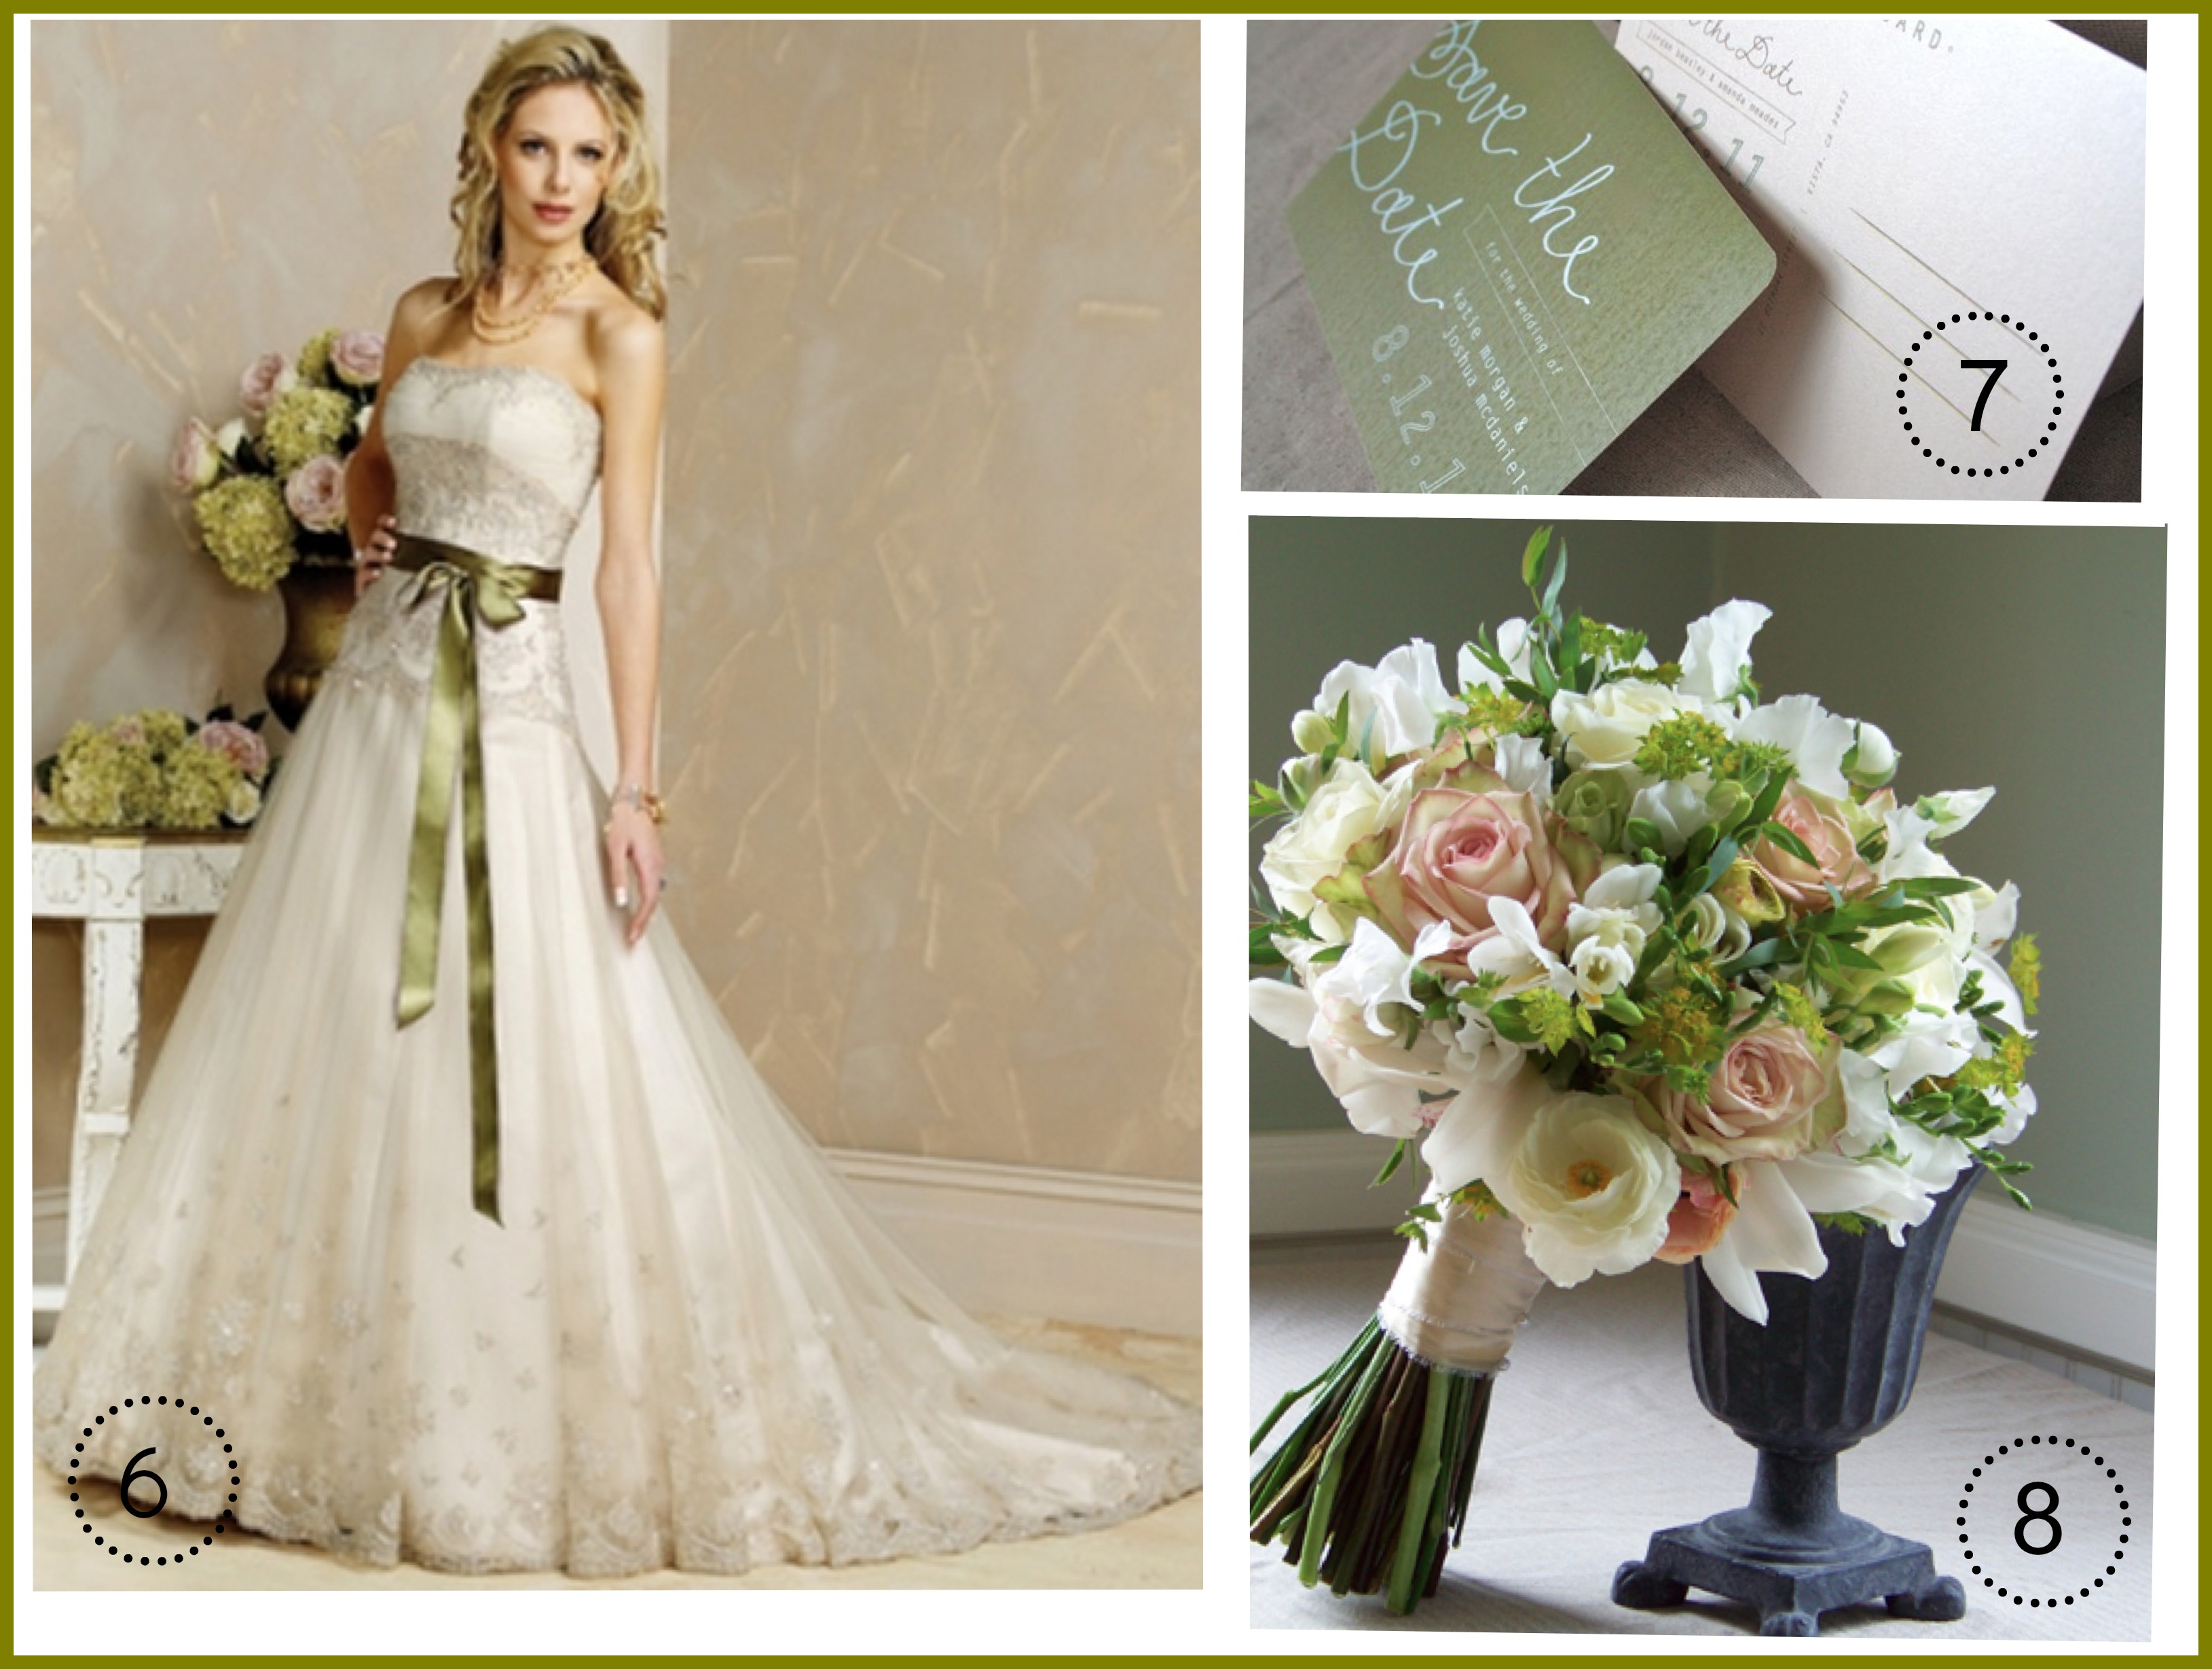 wedding dress with olive green sash / 7. olive green save the date ...